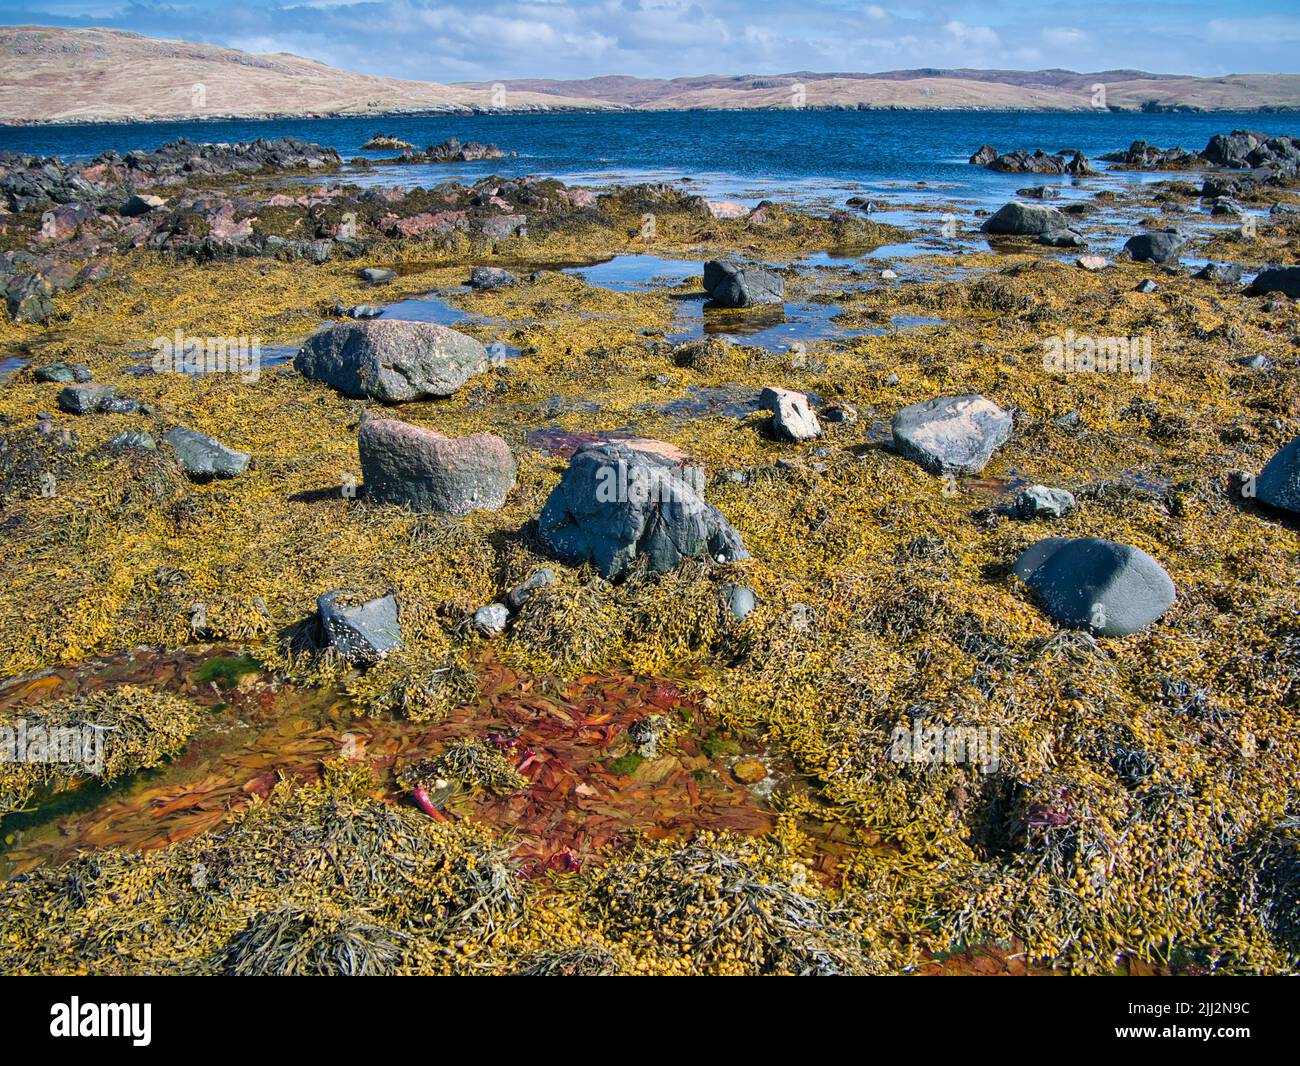 Extensive growth of bladderwrack seaweed on a rocky shoreline at low tide on the Ness of Hillswick, Northmavine, Shetland, UK. Stock Photo